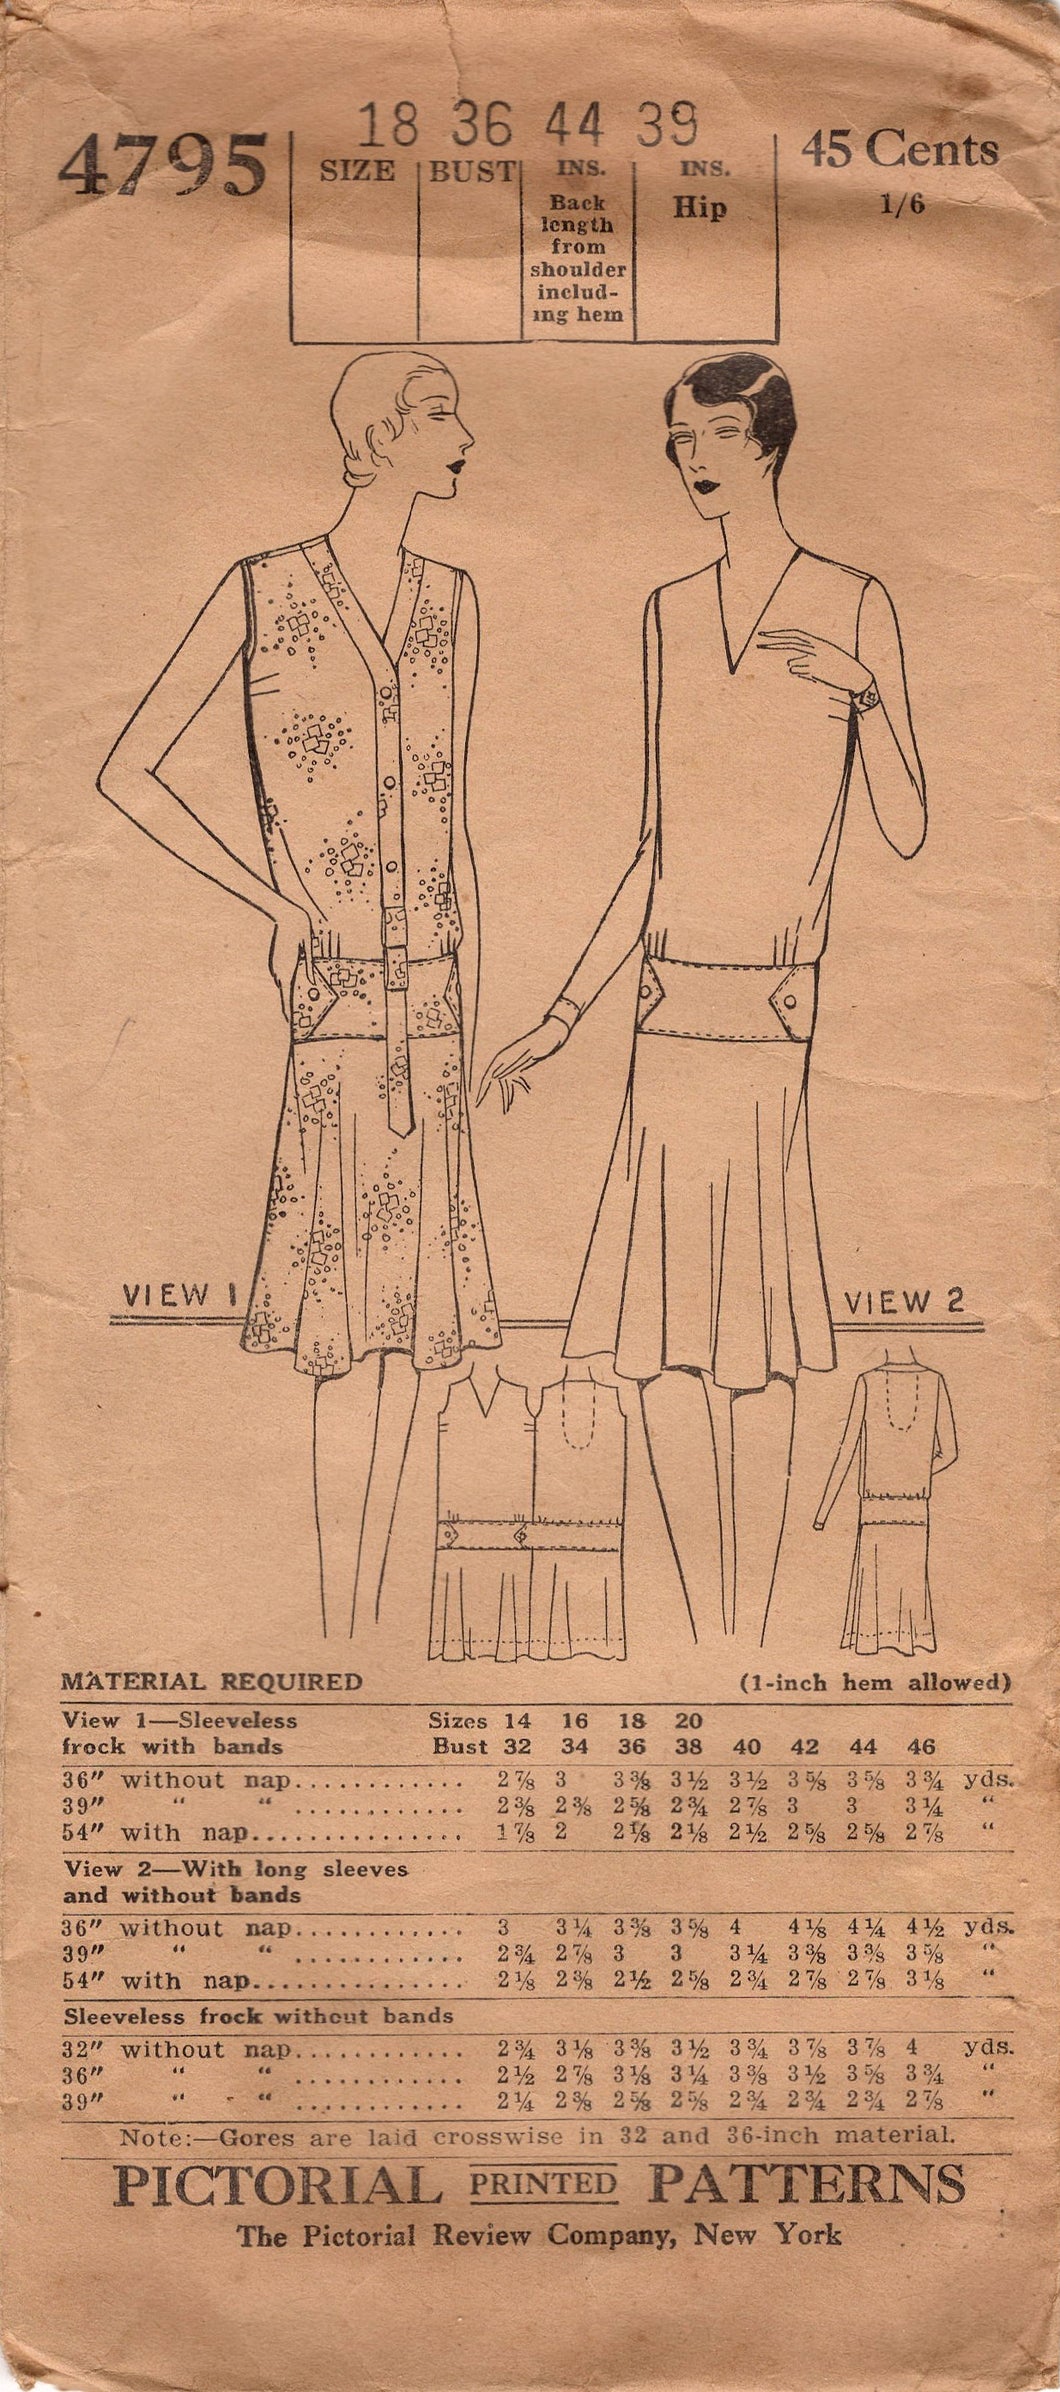 1920's Pictorial Button Up Dress with Drop Waist Belt and Flared Skirt Pattern - Bust 36